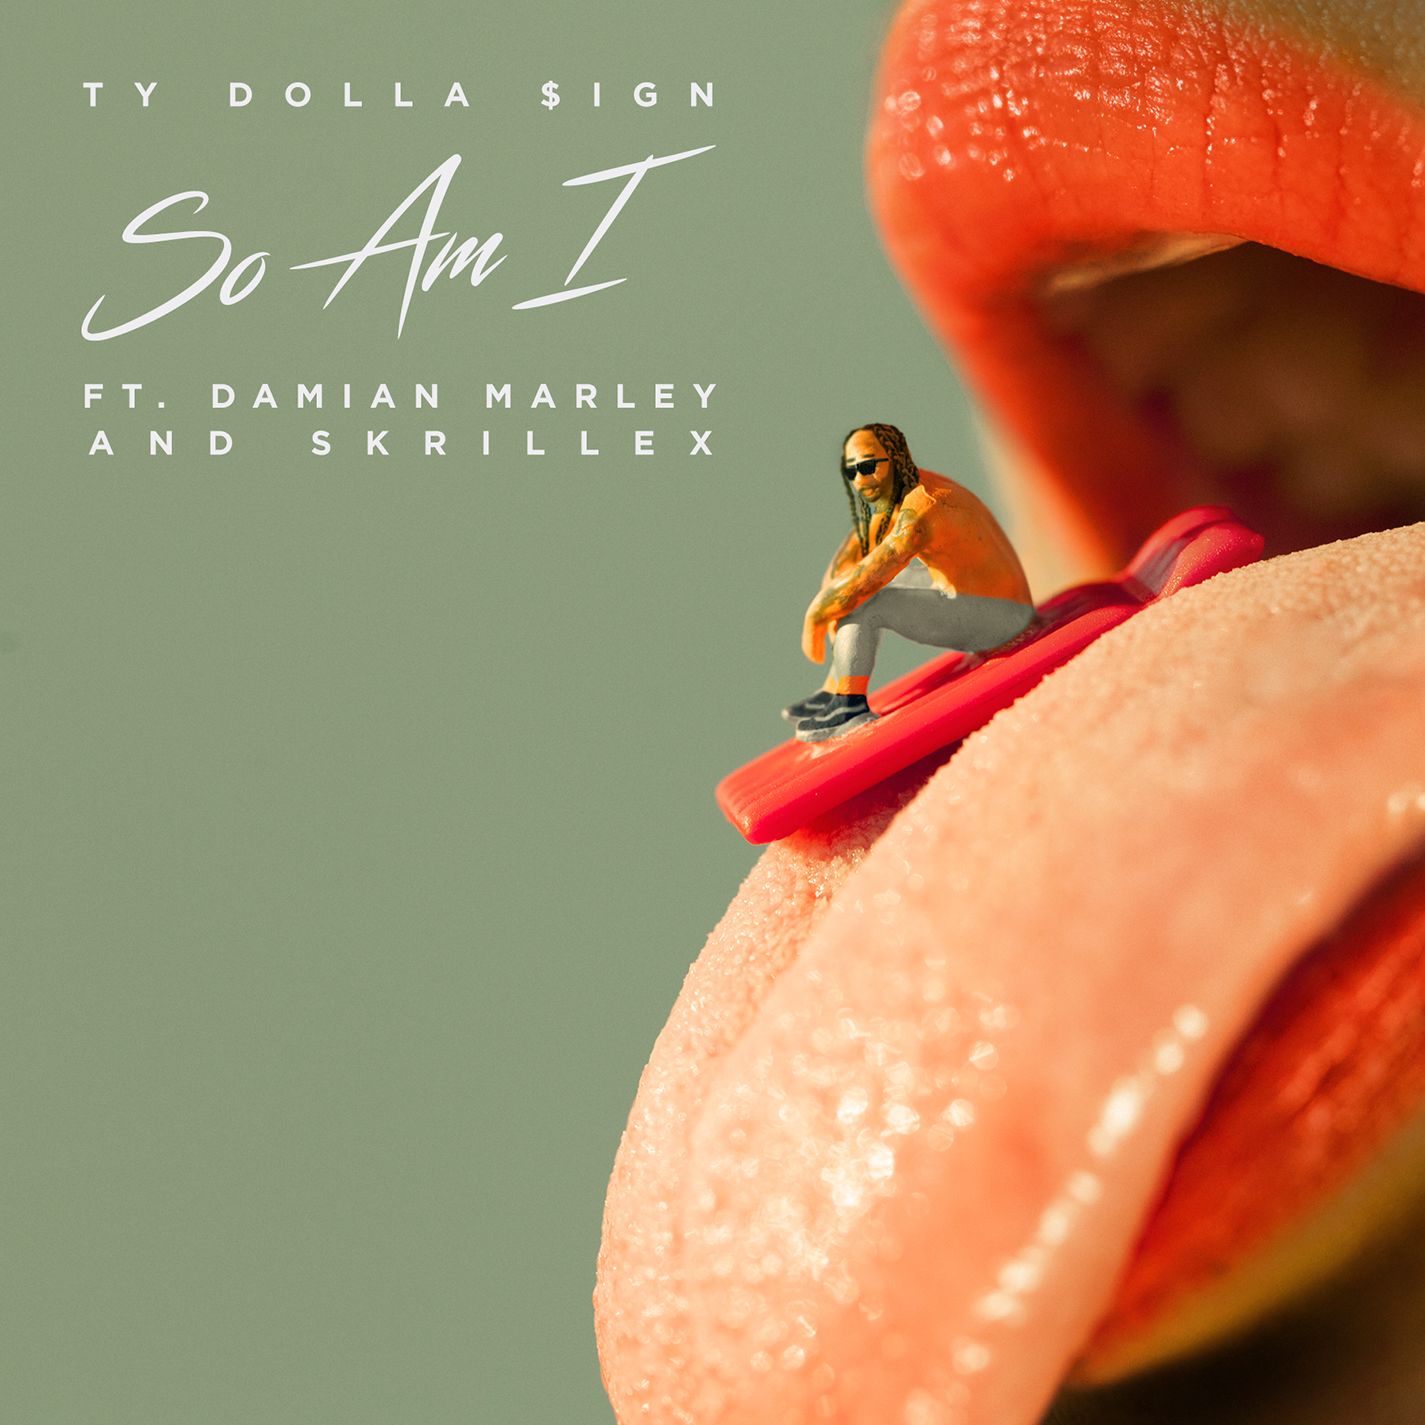 Ty Dolla $ign – So Am I ft. Damian Marley & Skrillex [Official Audio]